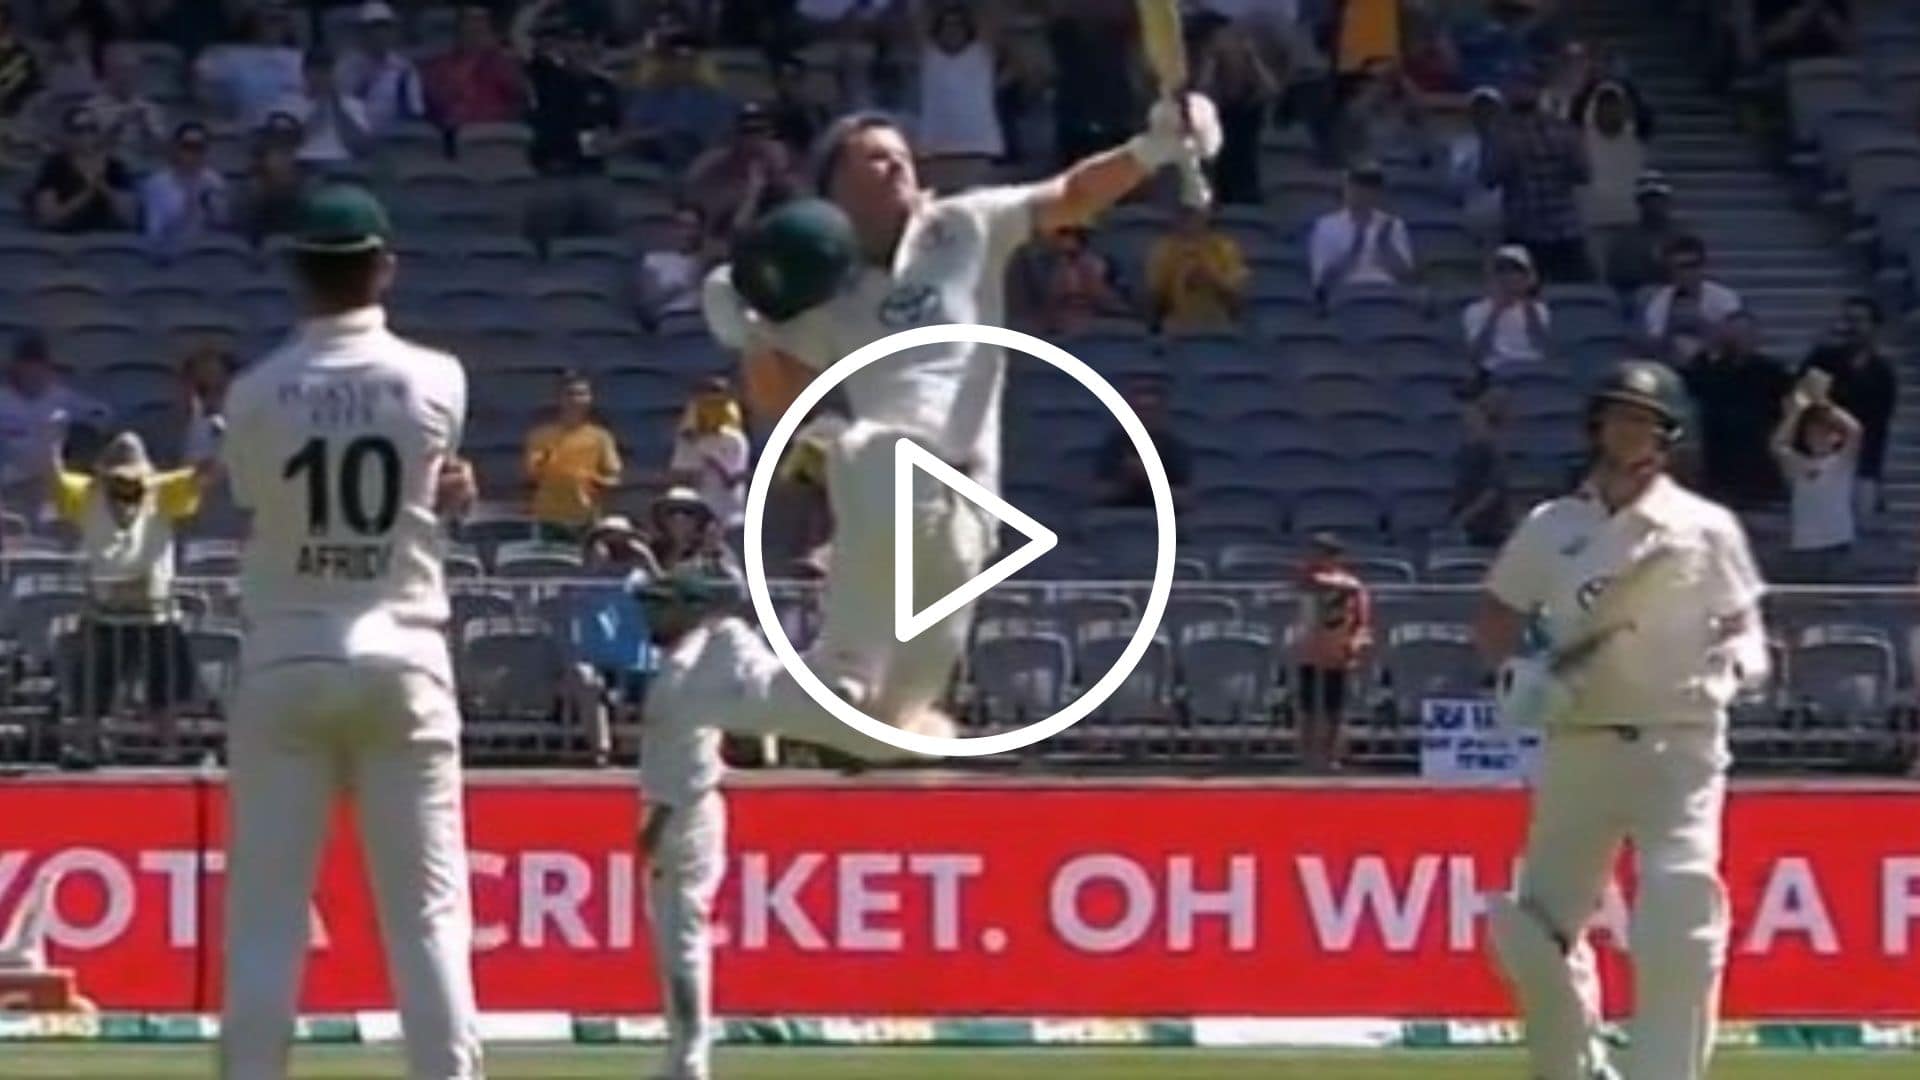 [Watch] David Warner Celebrates Overdue Ton With Trademark Leap In 1st Test vs PAK